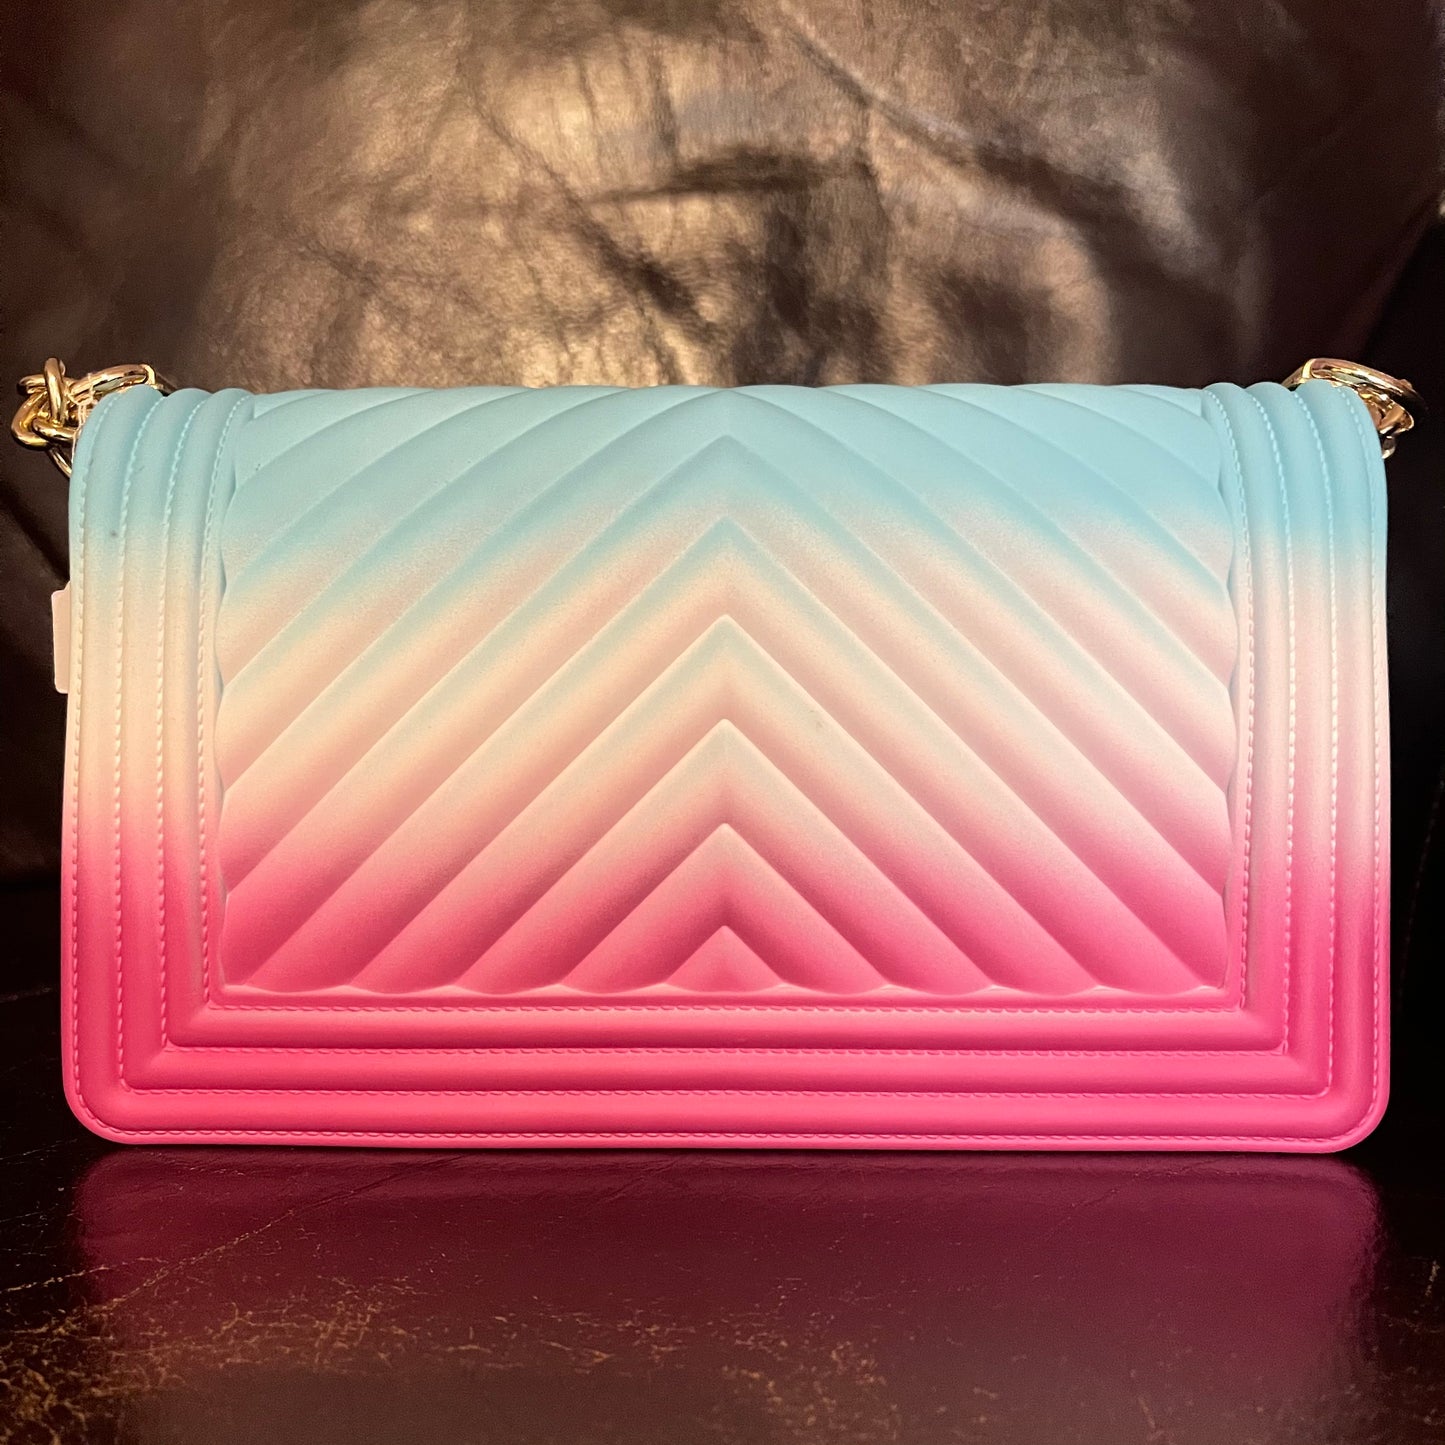 Blue, White & Pink Jelly bag